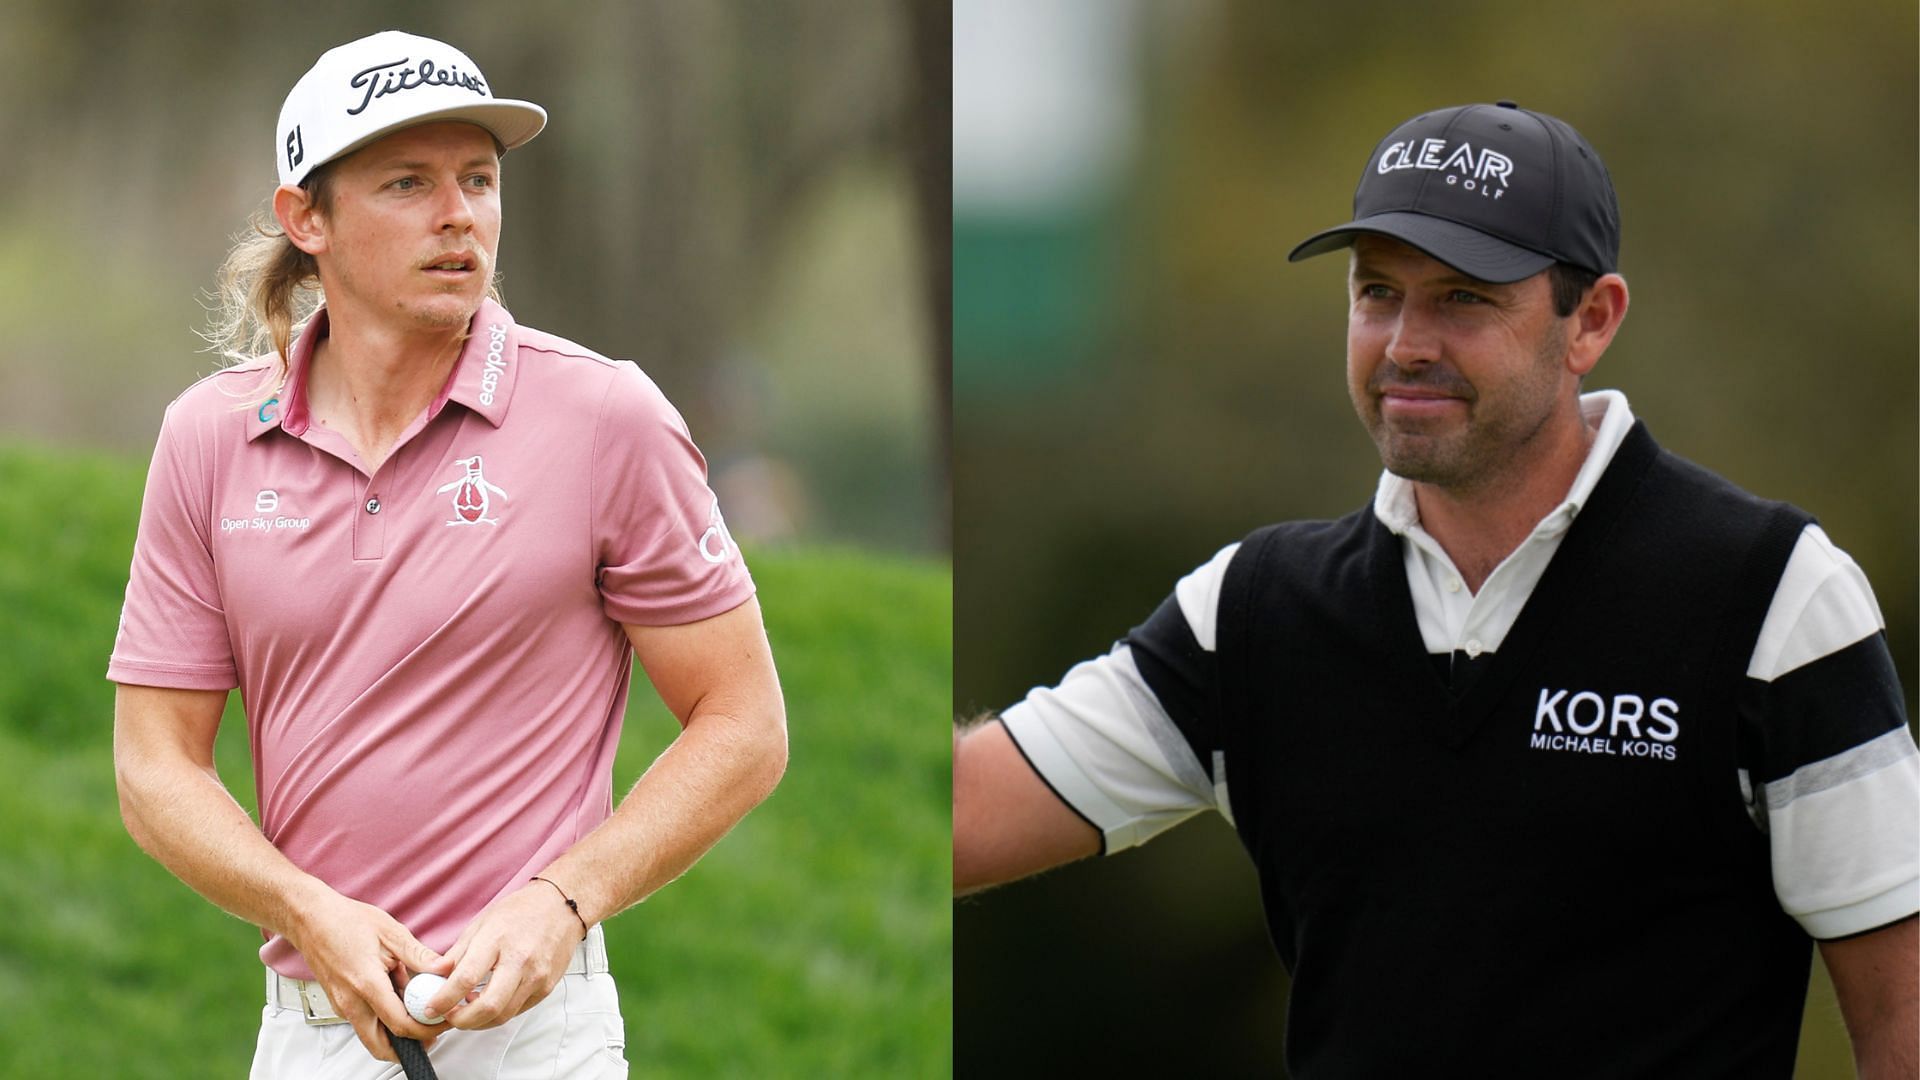 LIV Golfers Cameron Smith, Charl Schwartzel playing on the DP World Tour this week (Images via Getty)